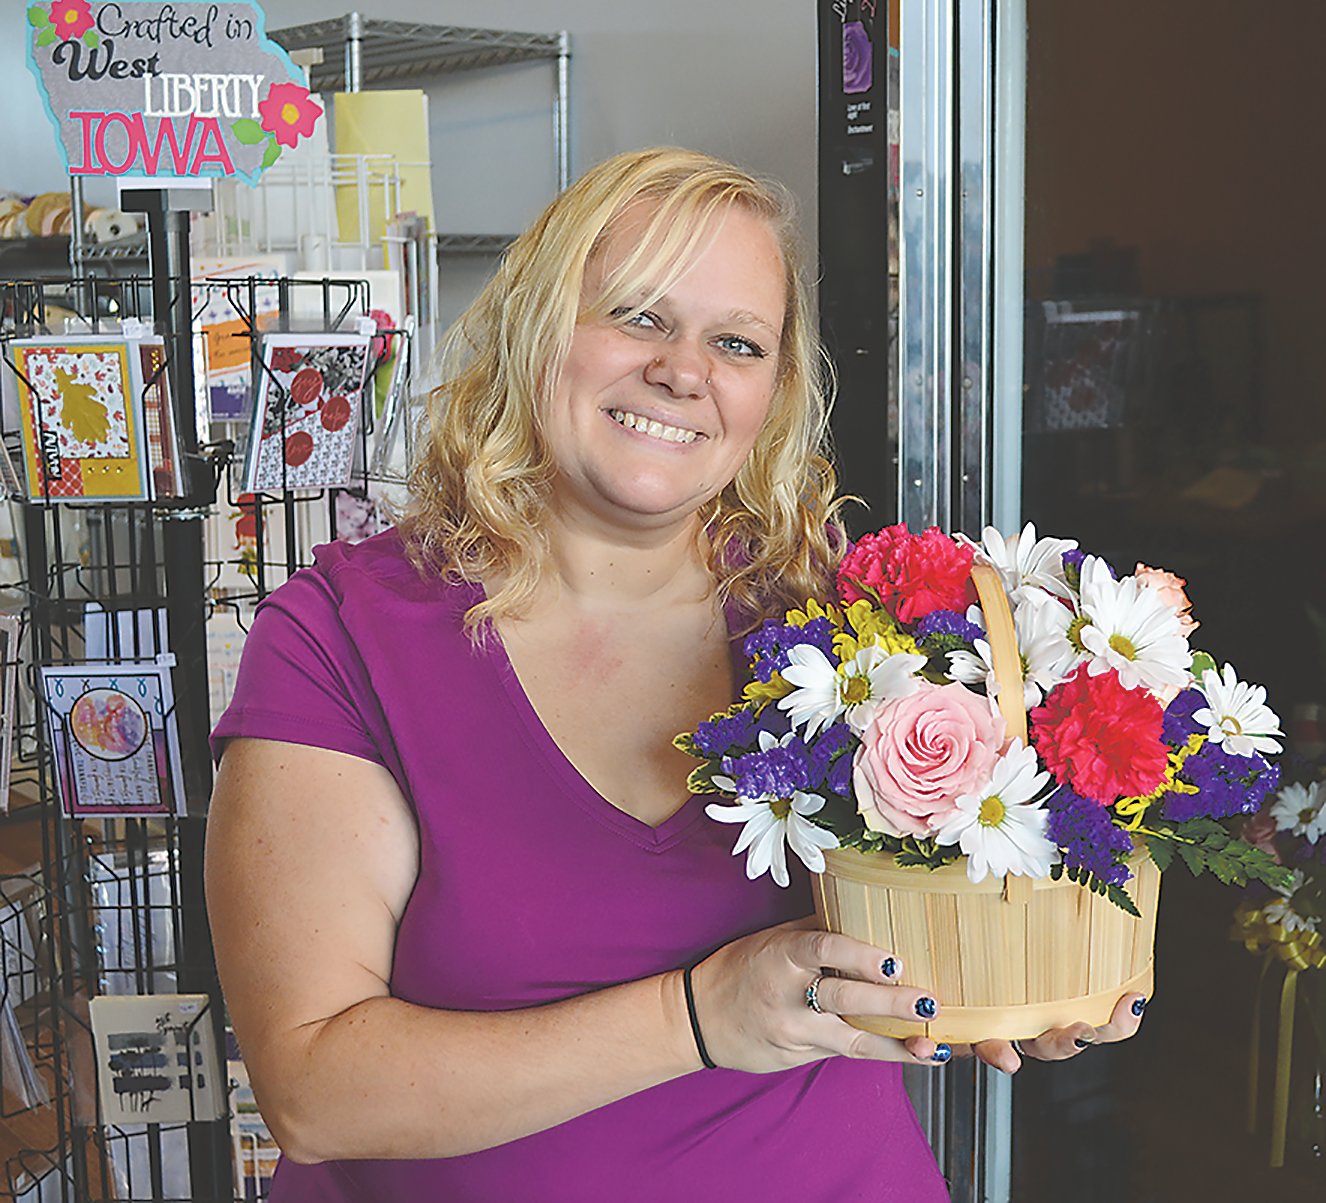 Flower Yard owner Destiny Brumbaugh with one of her floral bouquet creations she made. Brumbaugh worked for Jan McCrabb at Jan's Flower Yard for 20 years. She decided to open her own flower shop when McCrabb announced she was retiring.